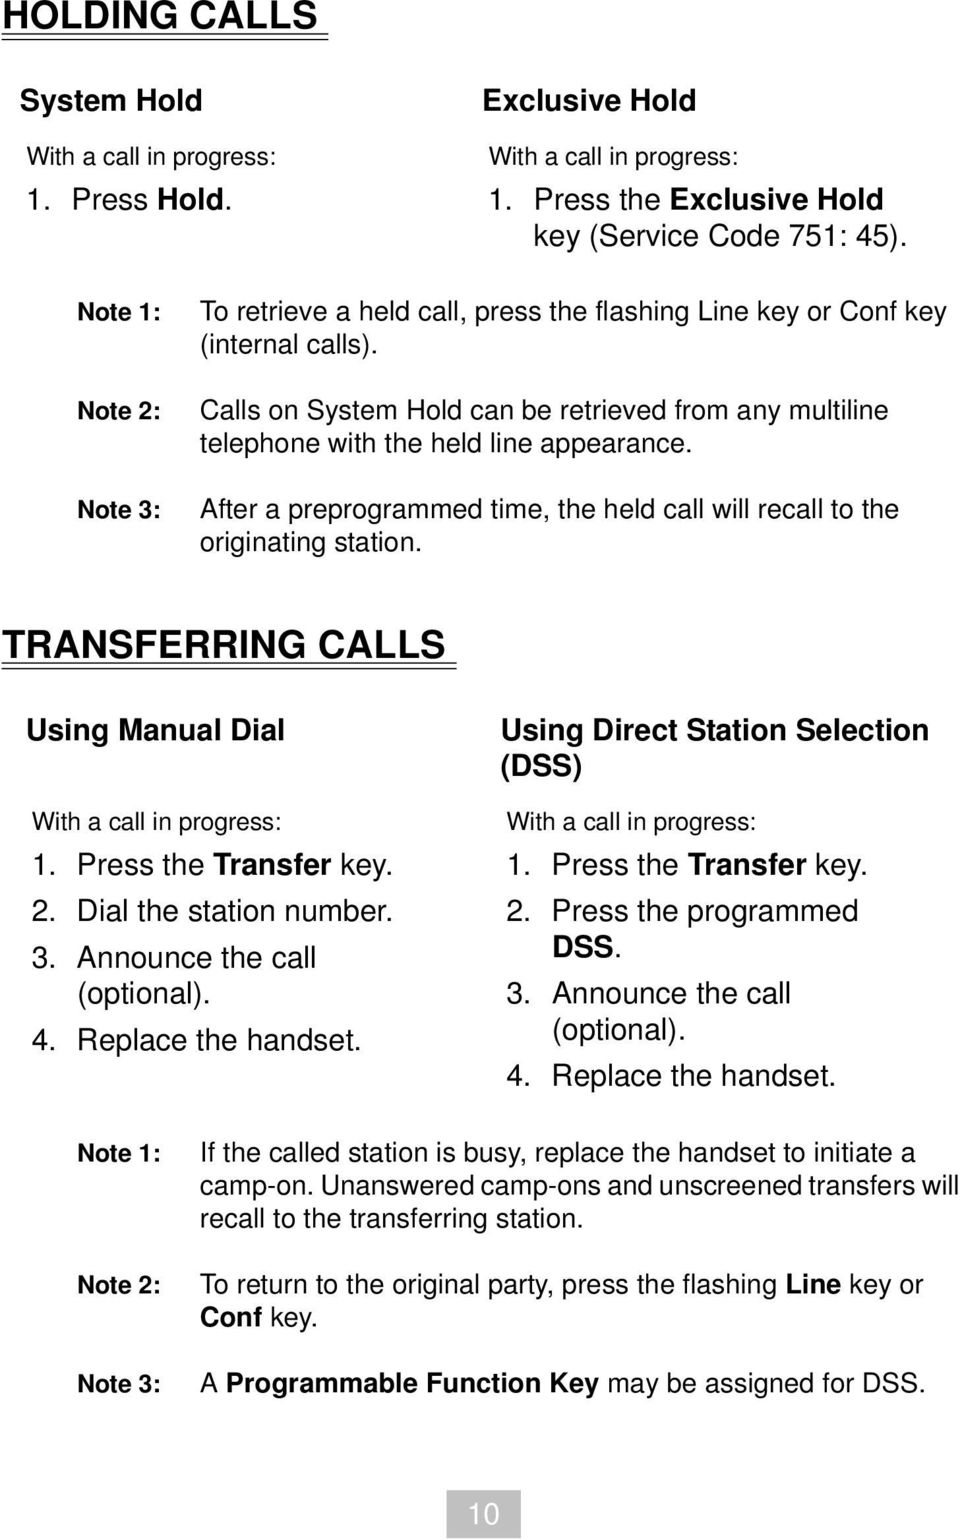 Calls on System Hold can be retrieved from any multiline telephone with the held line appearance. After a preprogrammed time, the held call will recall to the originating station.